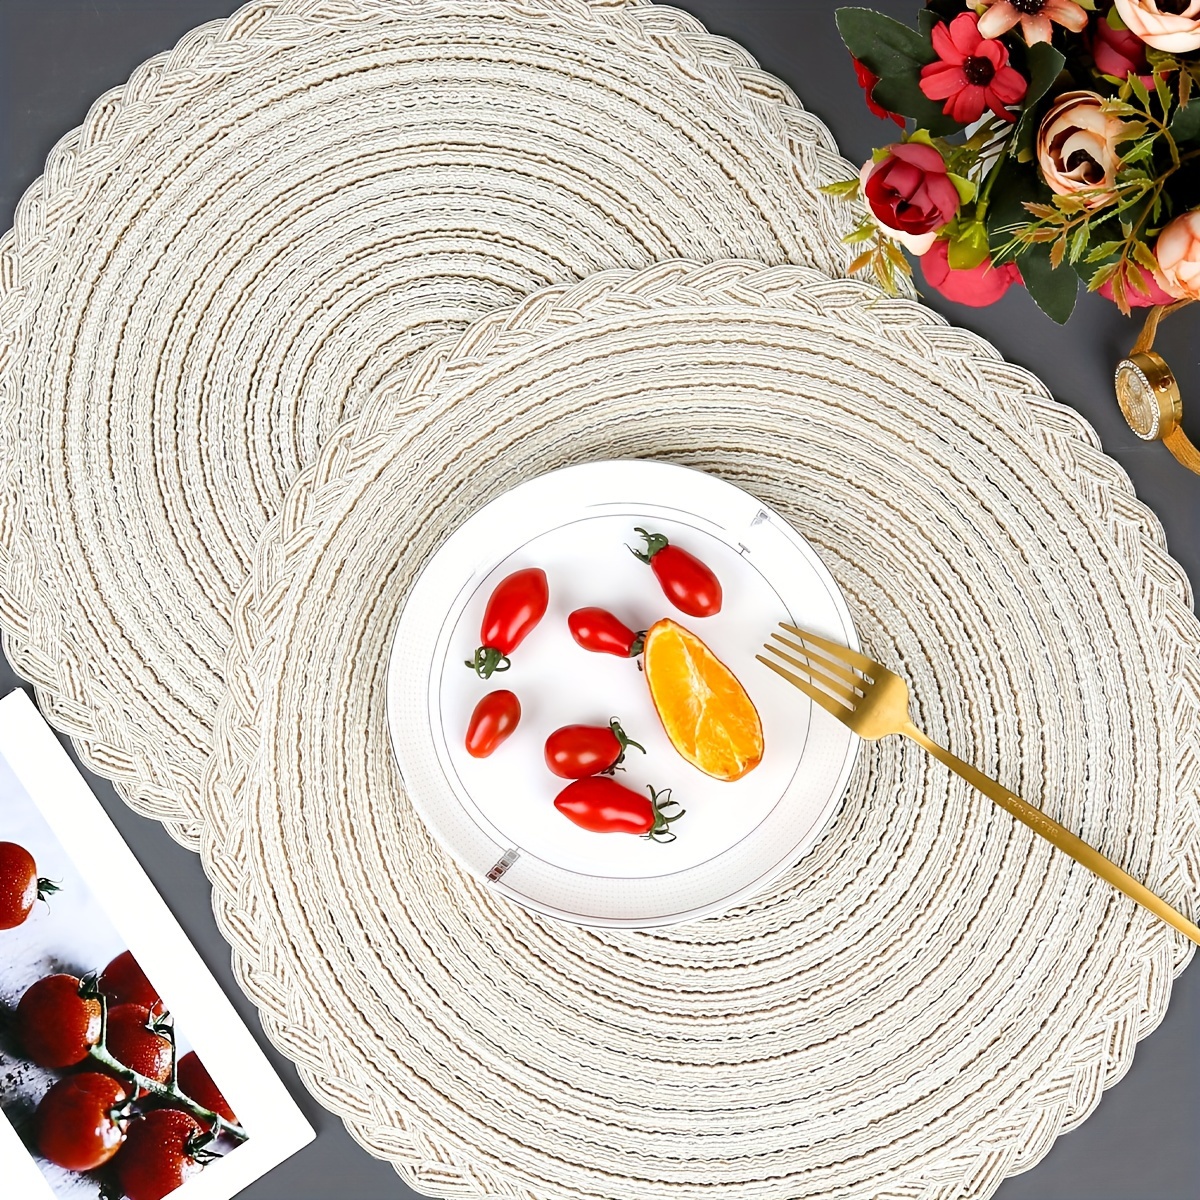 

4 Pcs Non-slip Round Woven Nordic Coaster Pad - Kitchen Accessories, Dining Table Placemat, Napkin For Table, Party - Hand Wash Only, Viscose Material, Round Shape, Knit Fabric